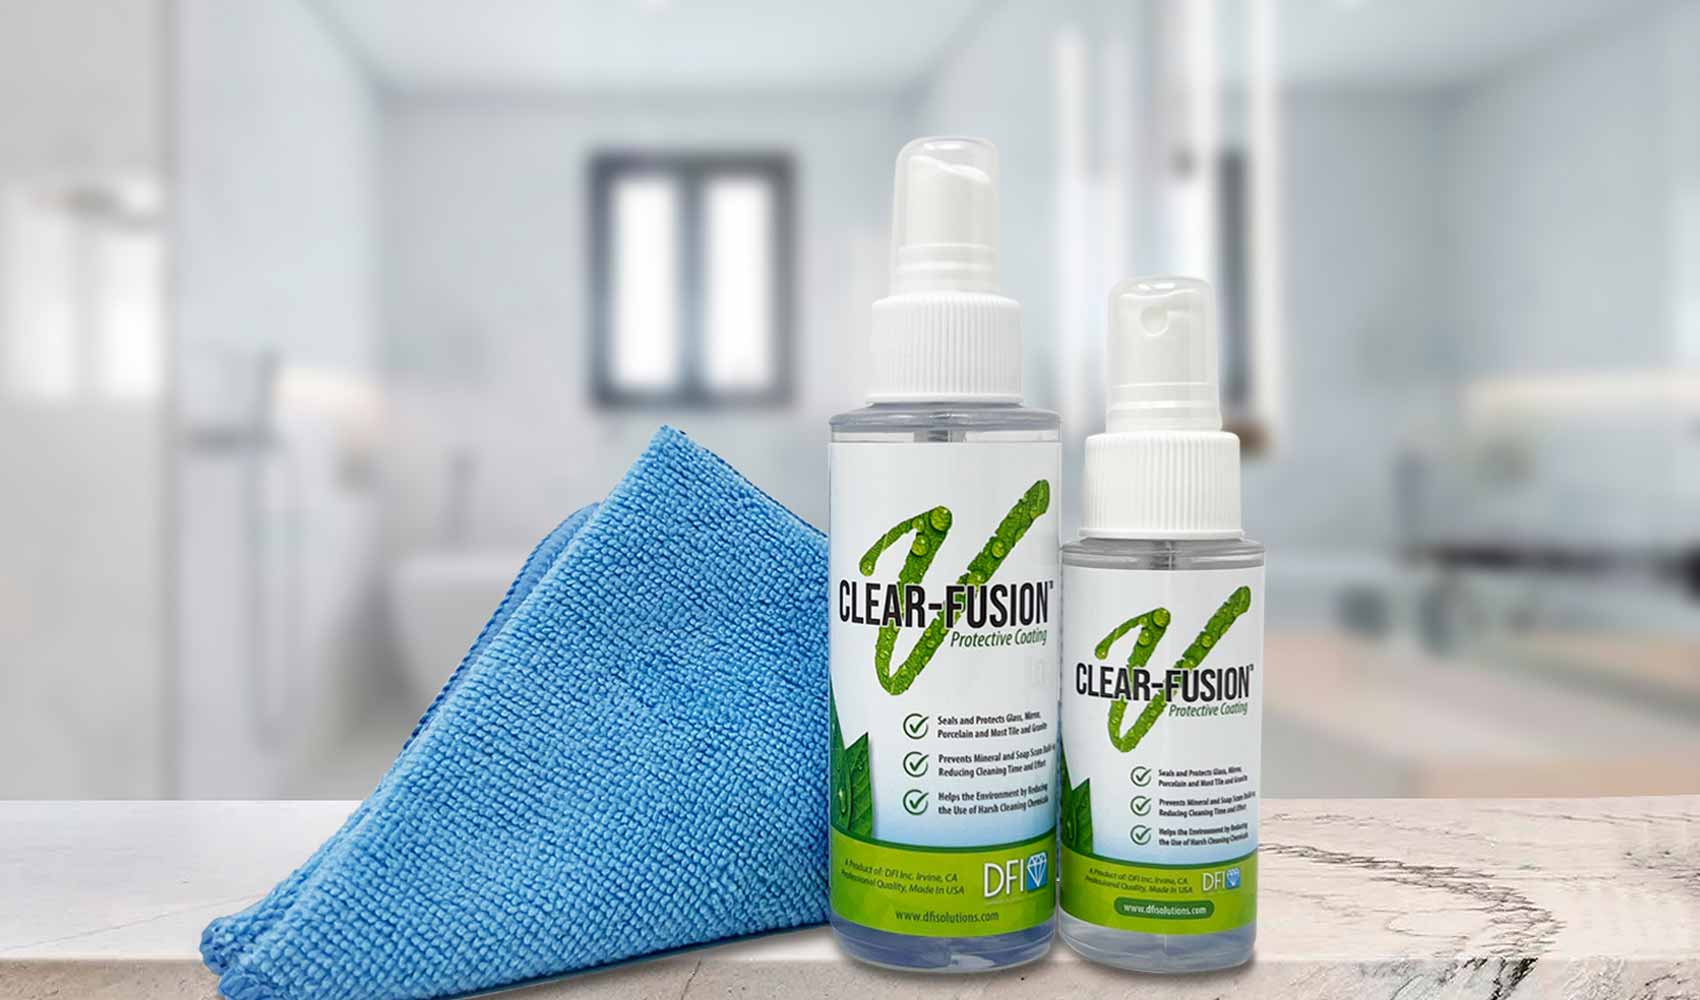 Clear-Fusion V Bottles with Microfiber Towel on Blurred Bathroom Background